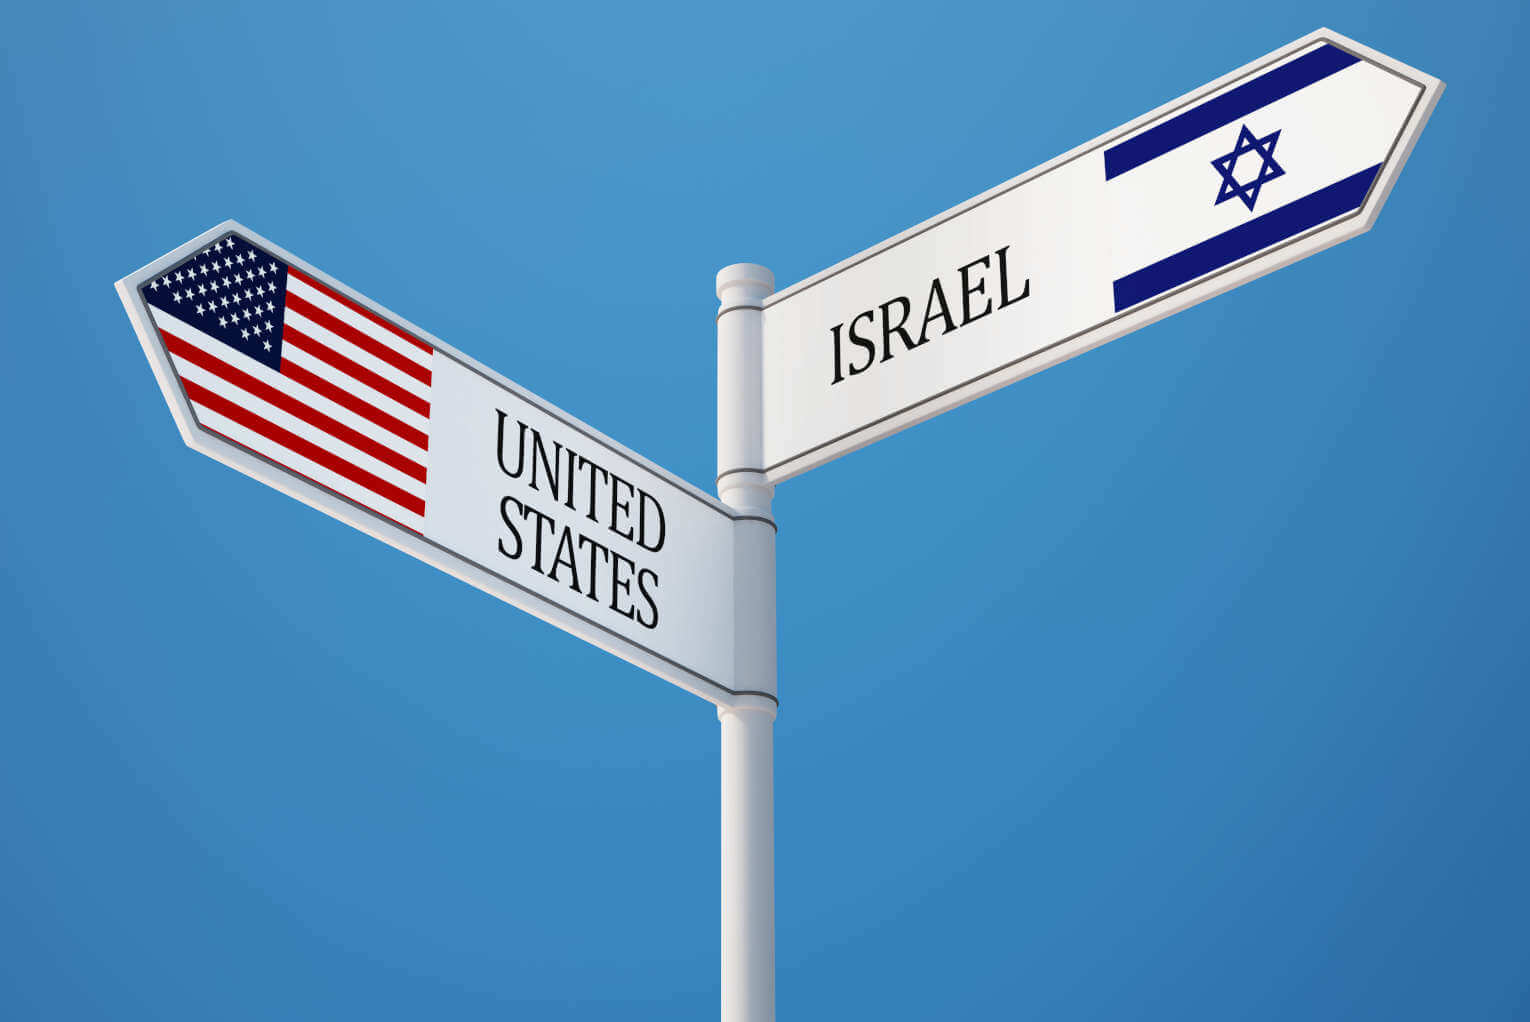 Israelis React to White House Demands: ‘America Has Become Israel’s Tactical Enemy’